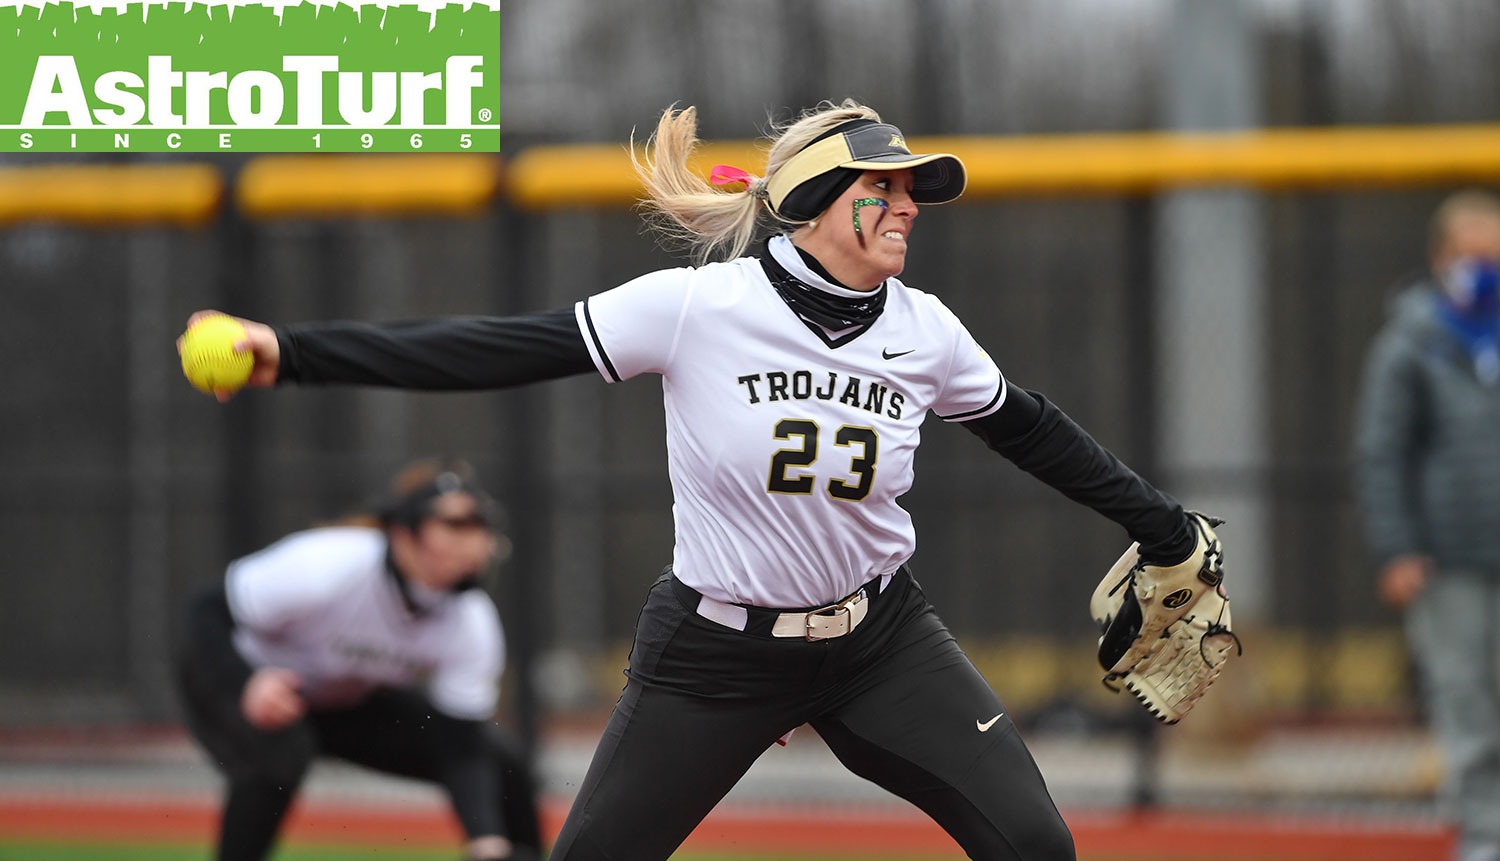 Duncan Earns South Atlantic Conference AstroTurf Softball Pitcher of the Week